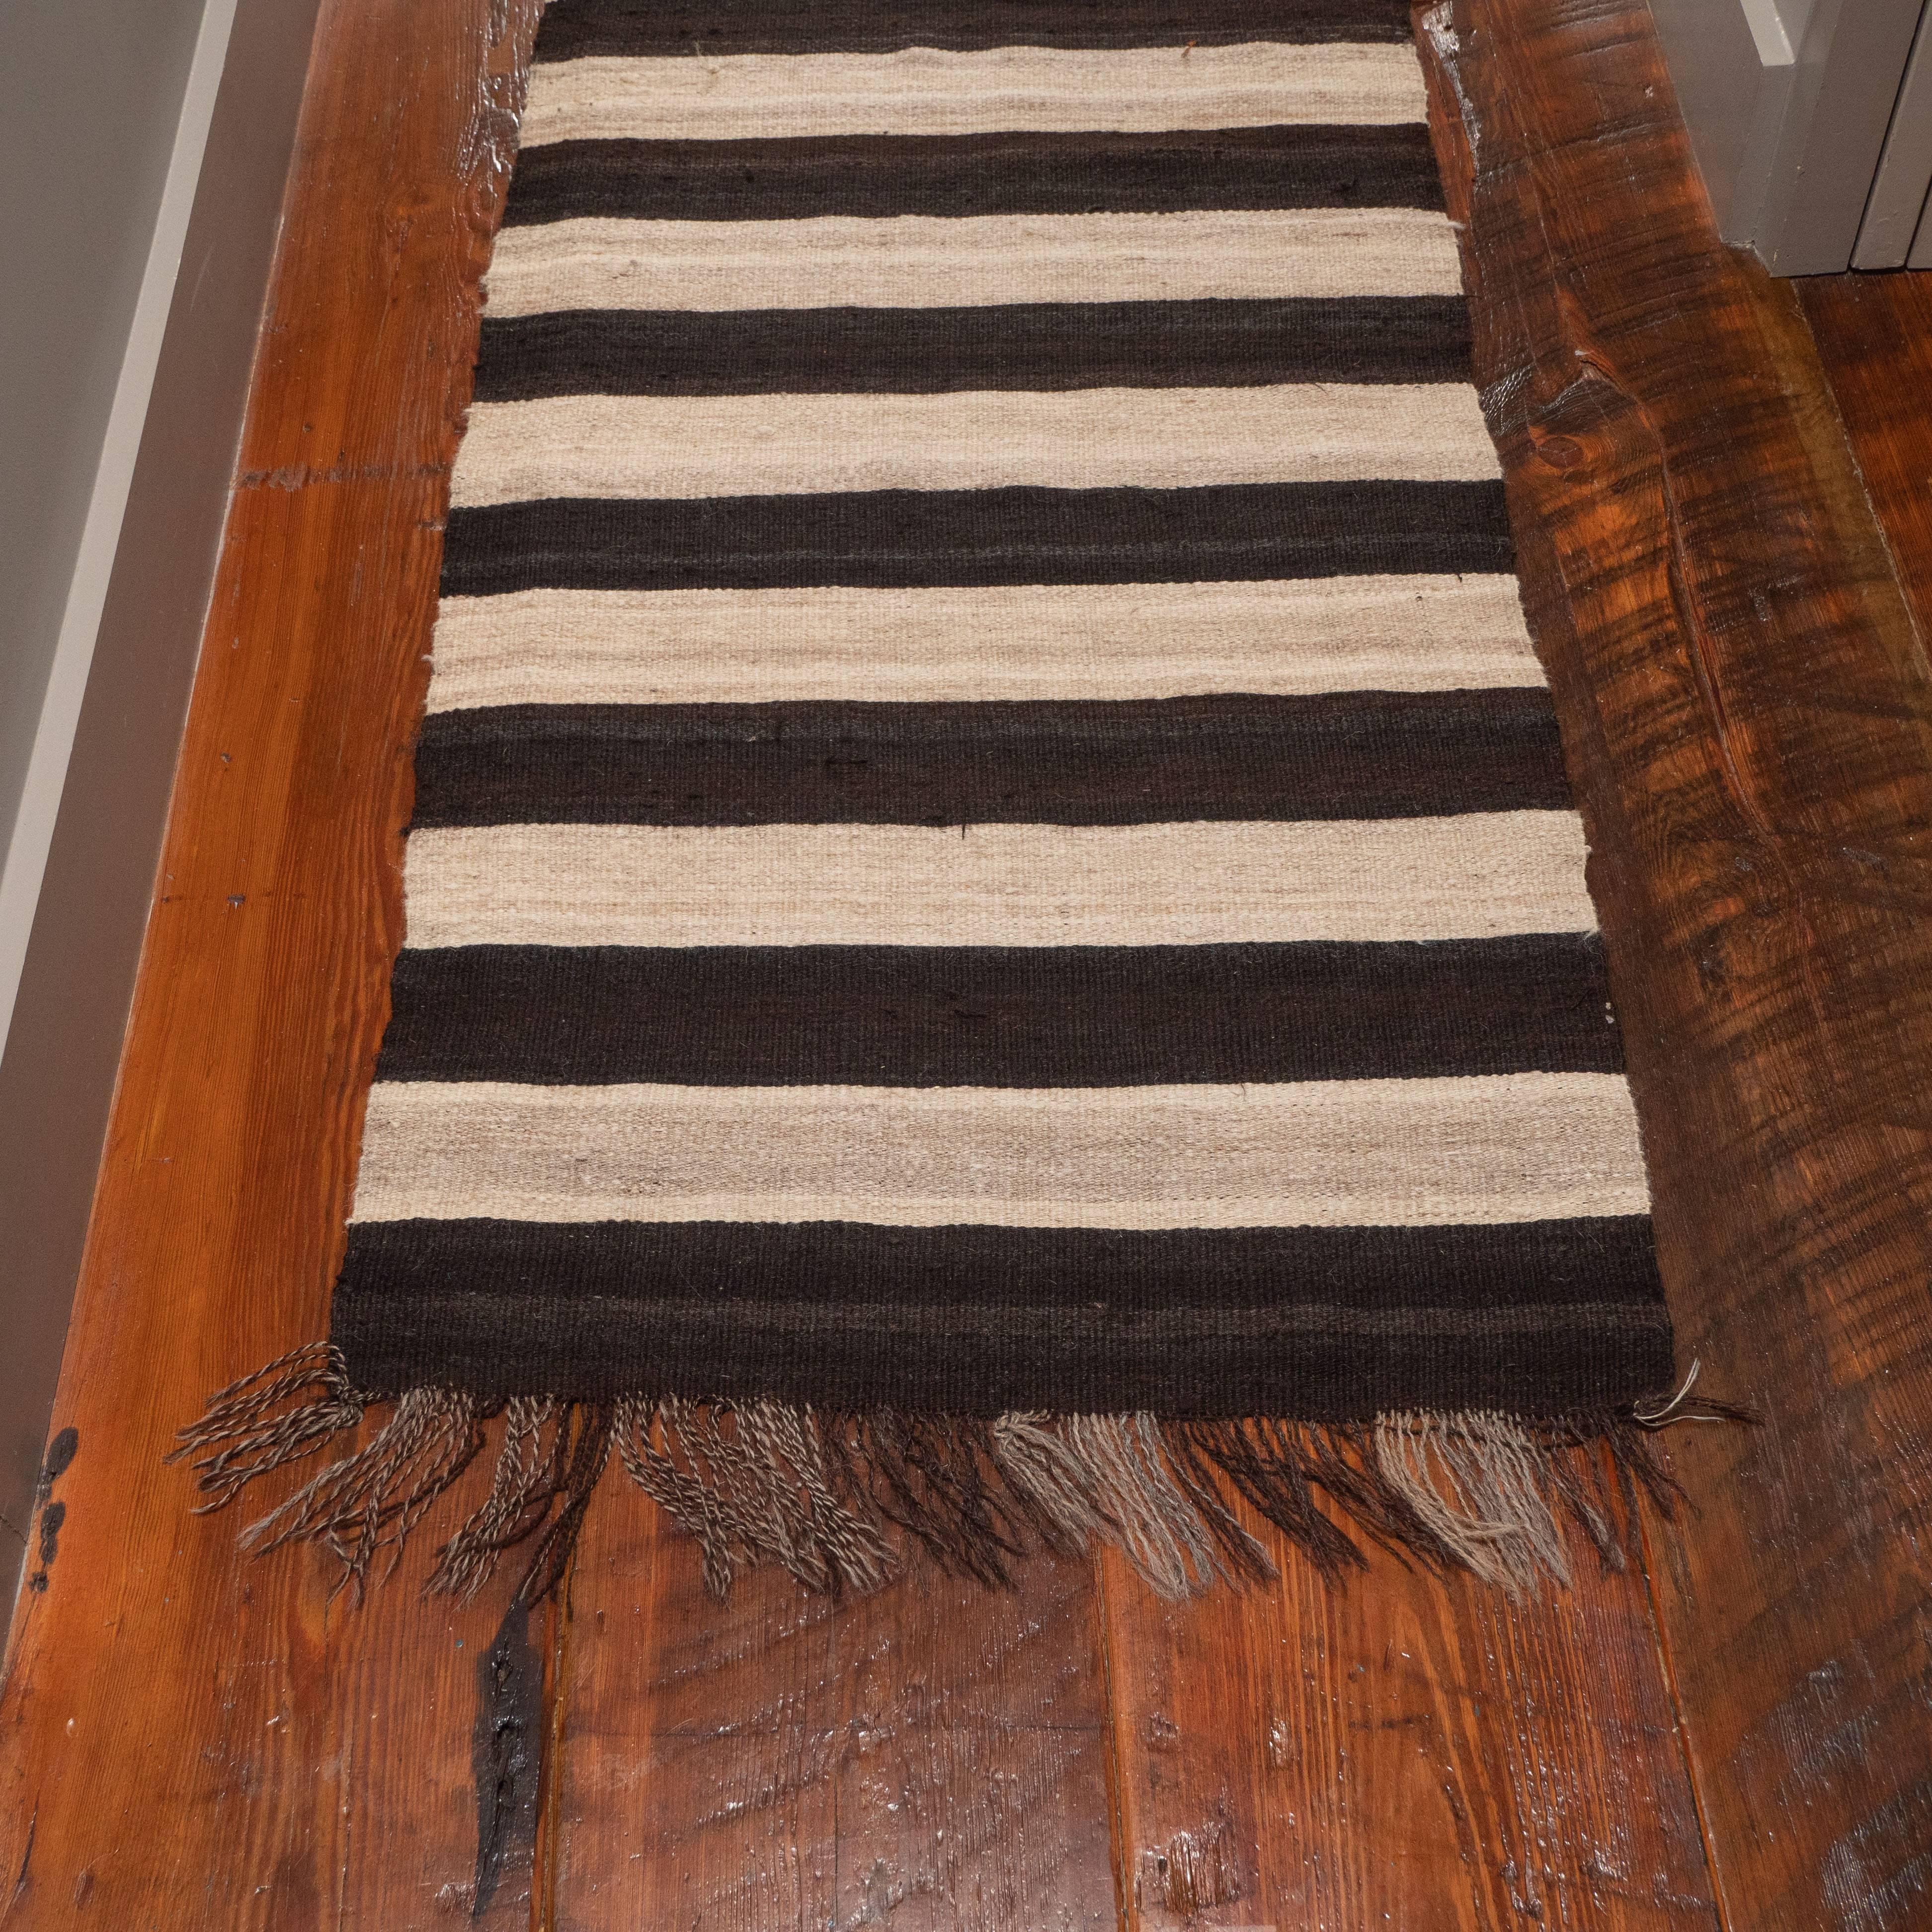 Kilim hand-knotted black and white runner


Measure: Length 138.5